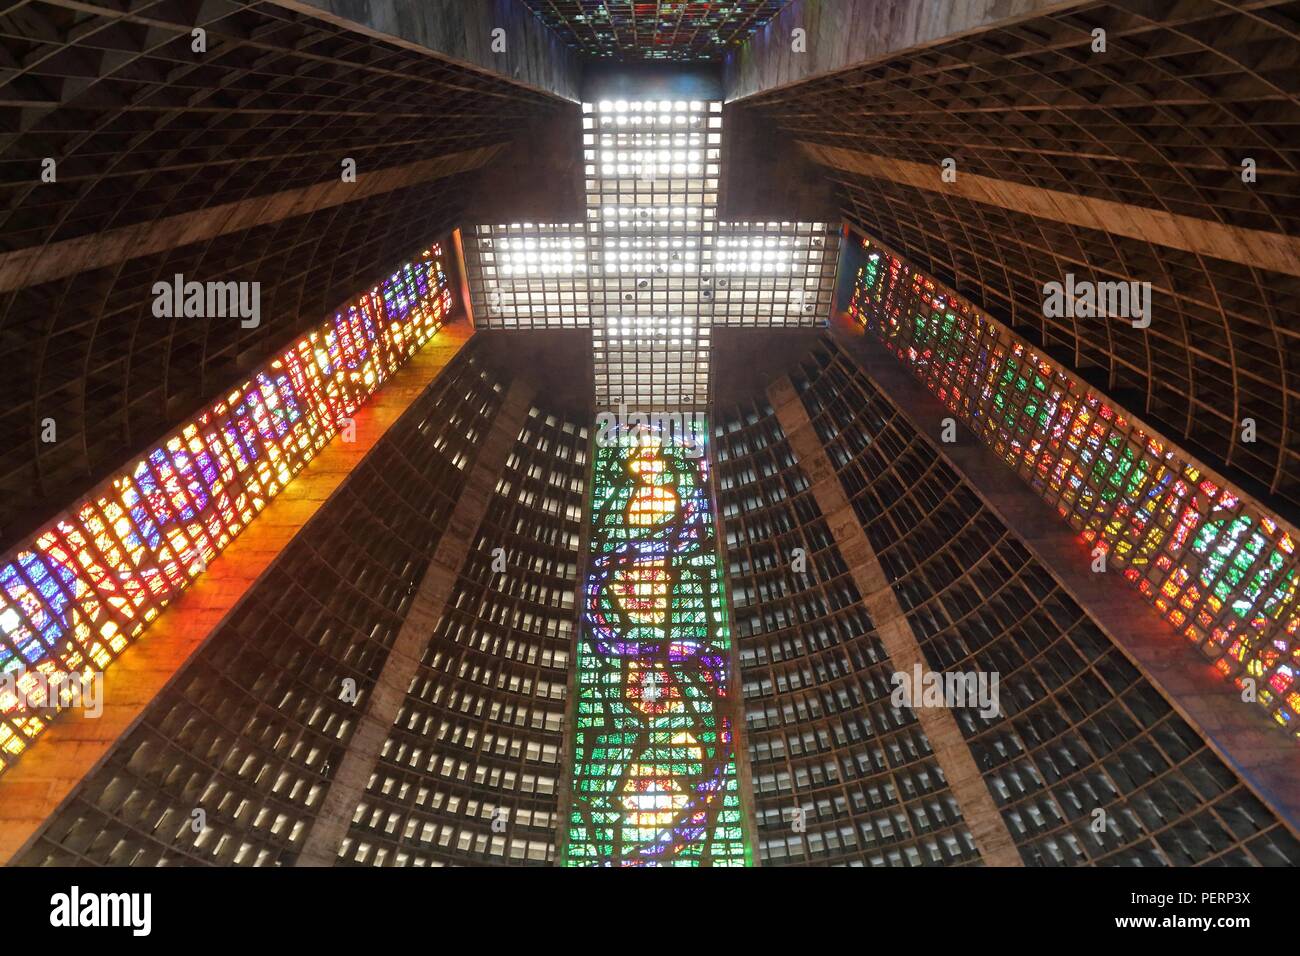 RIO DE JANEIRO, BRAZIL - OCTOBER 19, 2014: Interior view of cathedral in Rio de Janeiro. The modern style cathedral was completed in 1979. It was desi Stock Photo